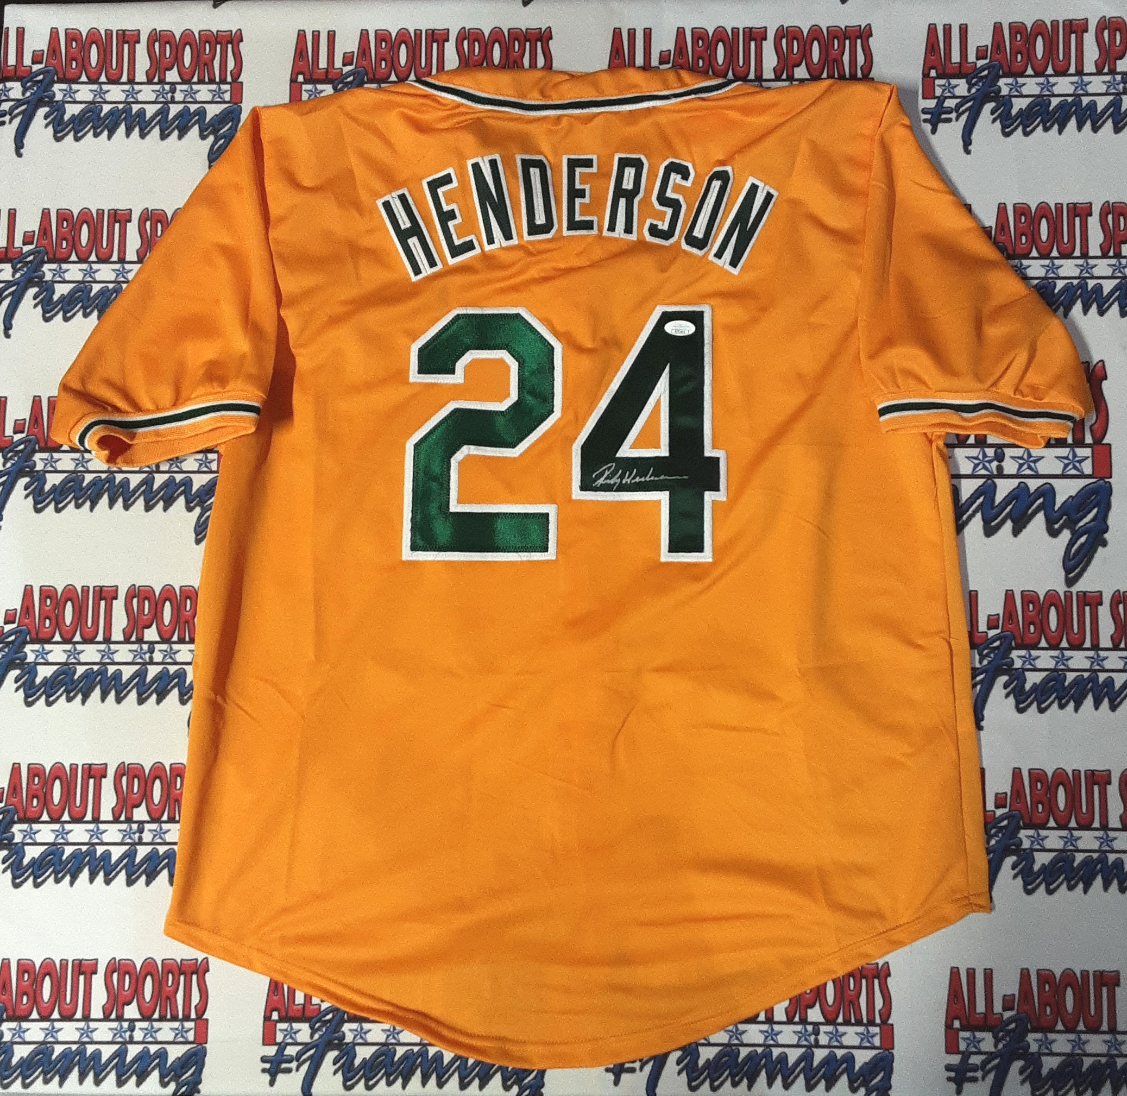 Rickey Henderson Authentic Signed Pro Style Jersey Autographed JSA